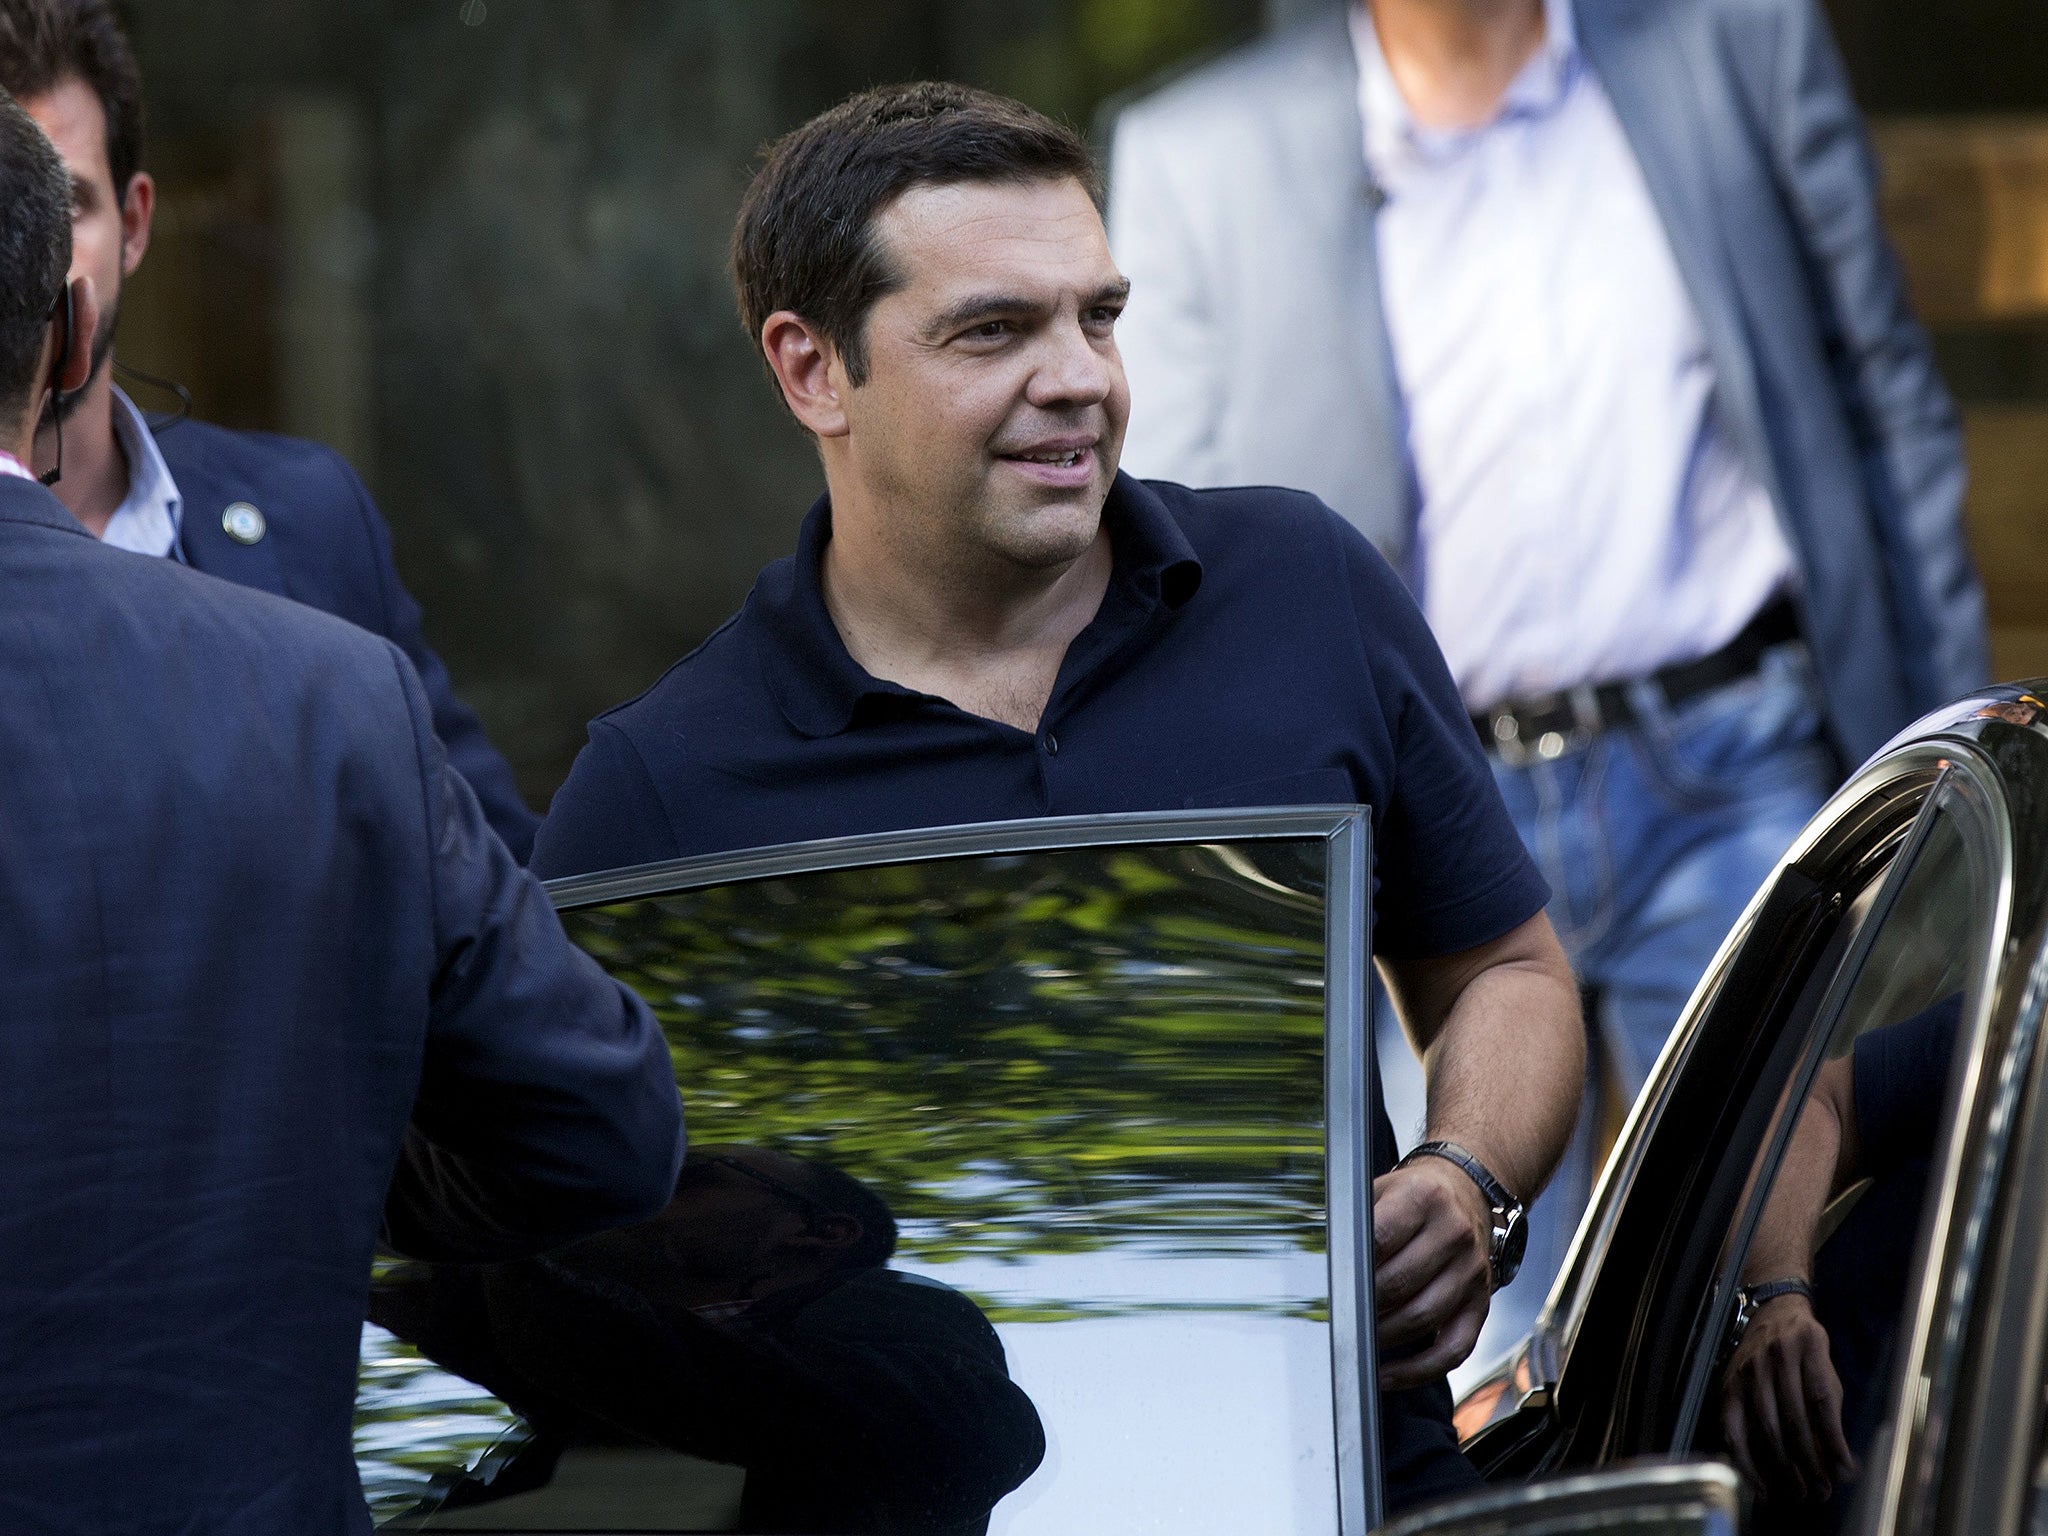 Greek outgoing Prime Minister Alexis Tsipras leaves his party's headquarters in Athens, Greece, August 21, 2015.